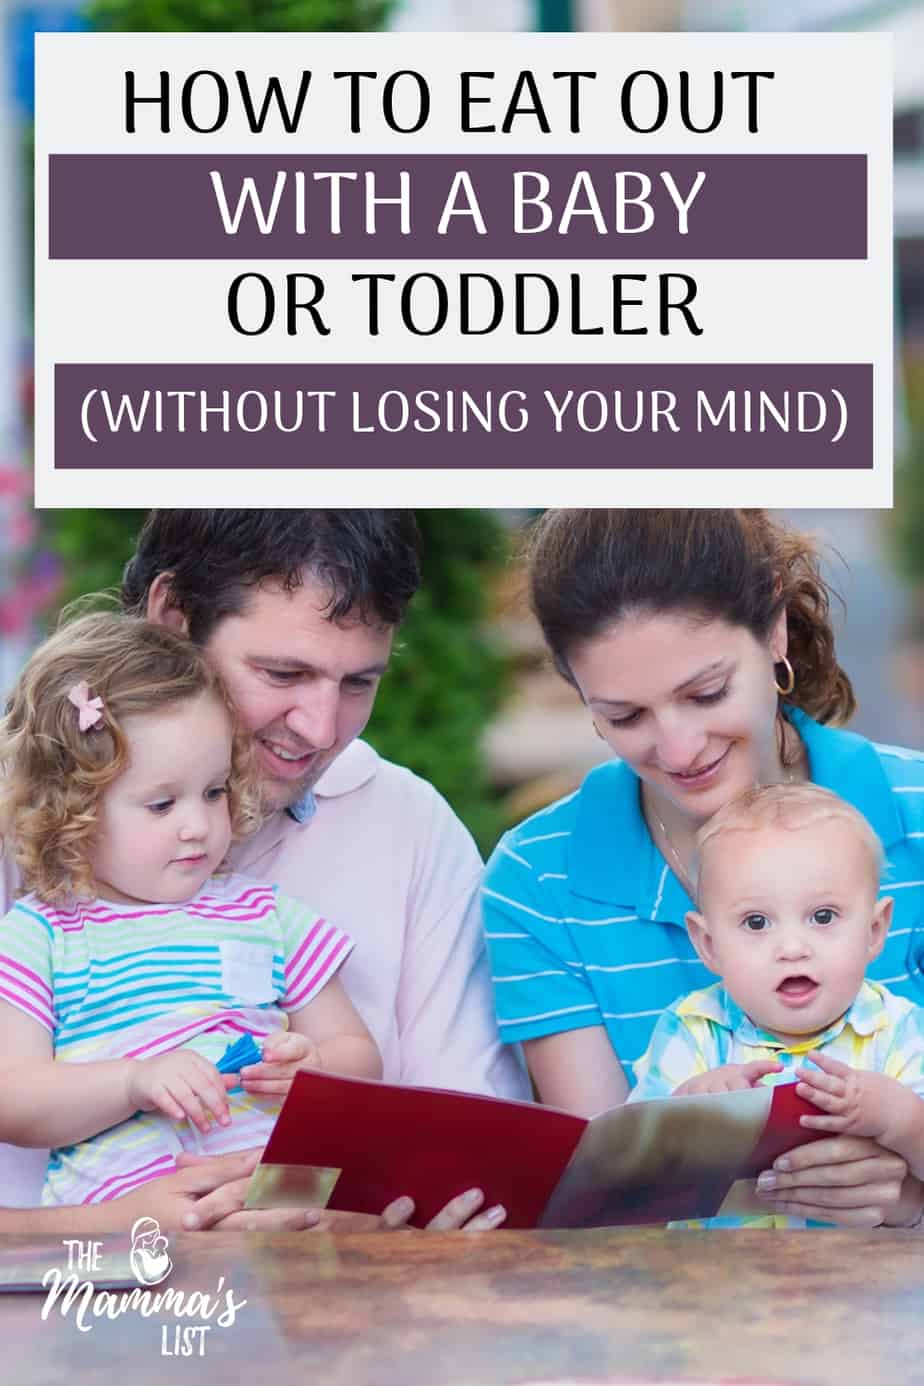 Do you feel like you can't eat out with your baby because she'll cry? Do you worry about your toddler throwing a massive tantrum if you go out to eat? If you've ever wondered how to successfully eat out with a baby or toddler - without going crazy- this is the article for you. Click through for strategies on how to eat out with kids AND keep your sanity!